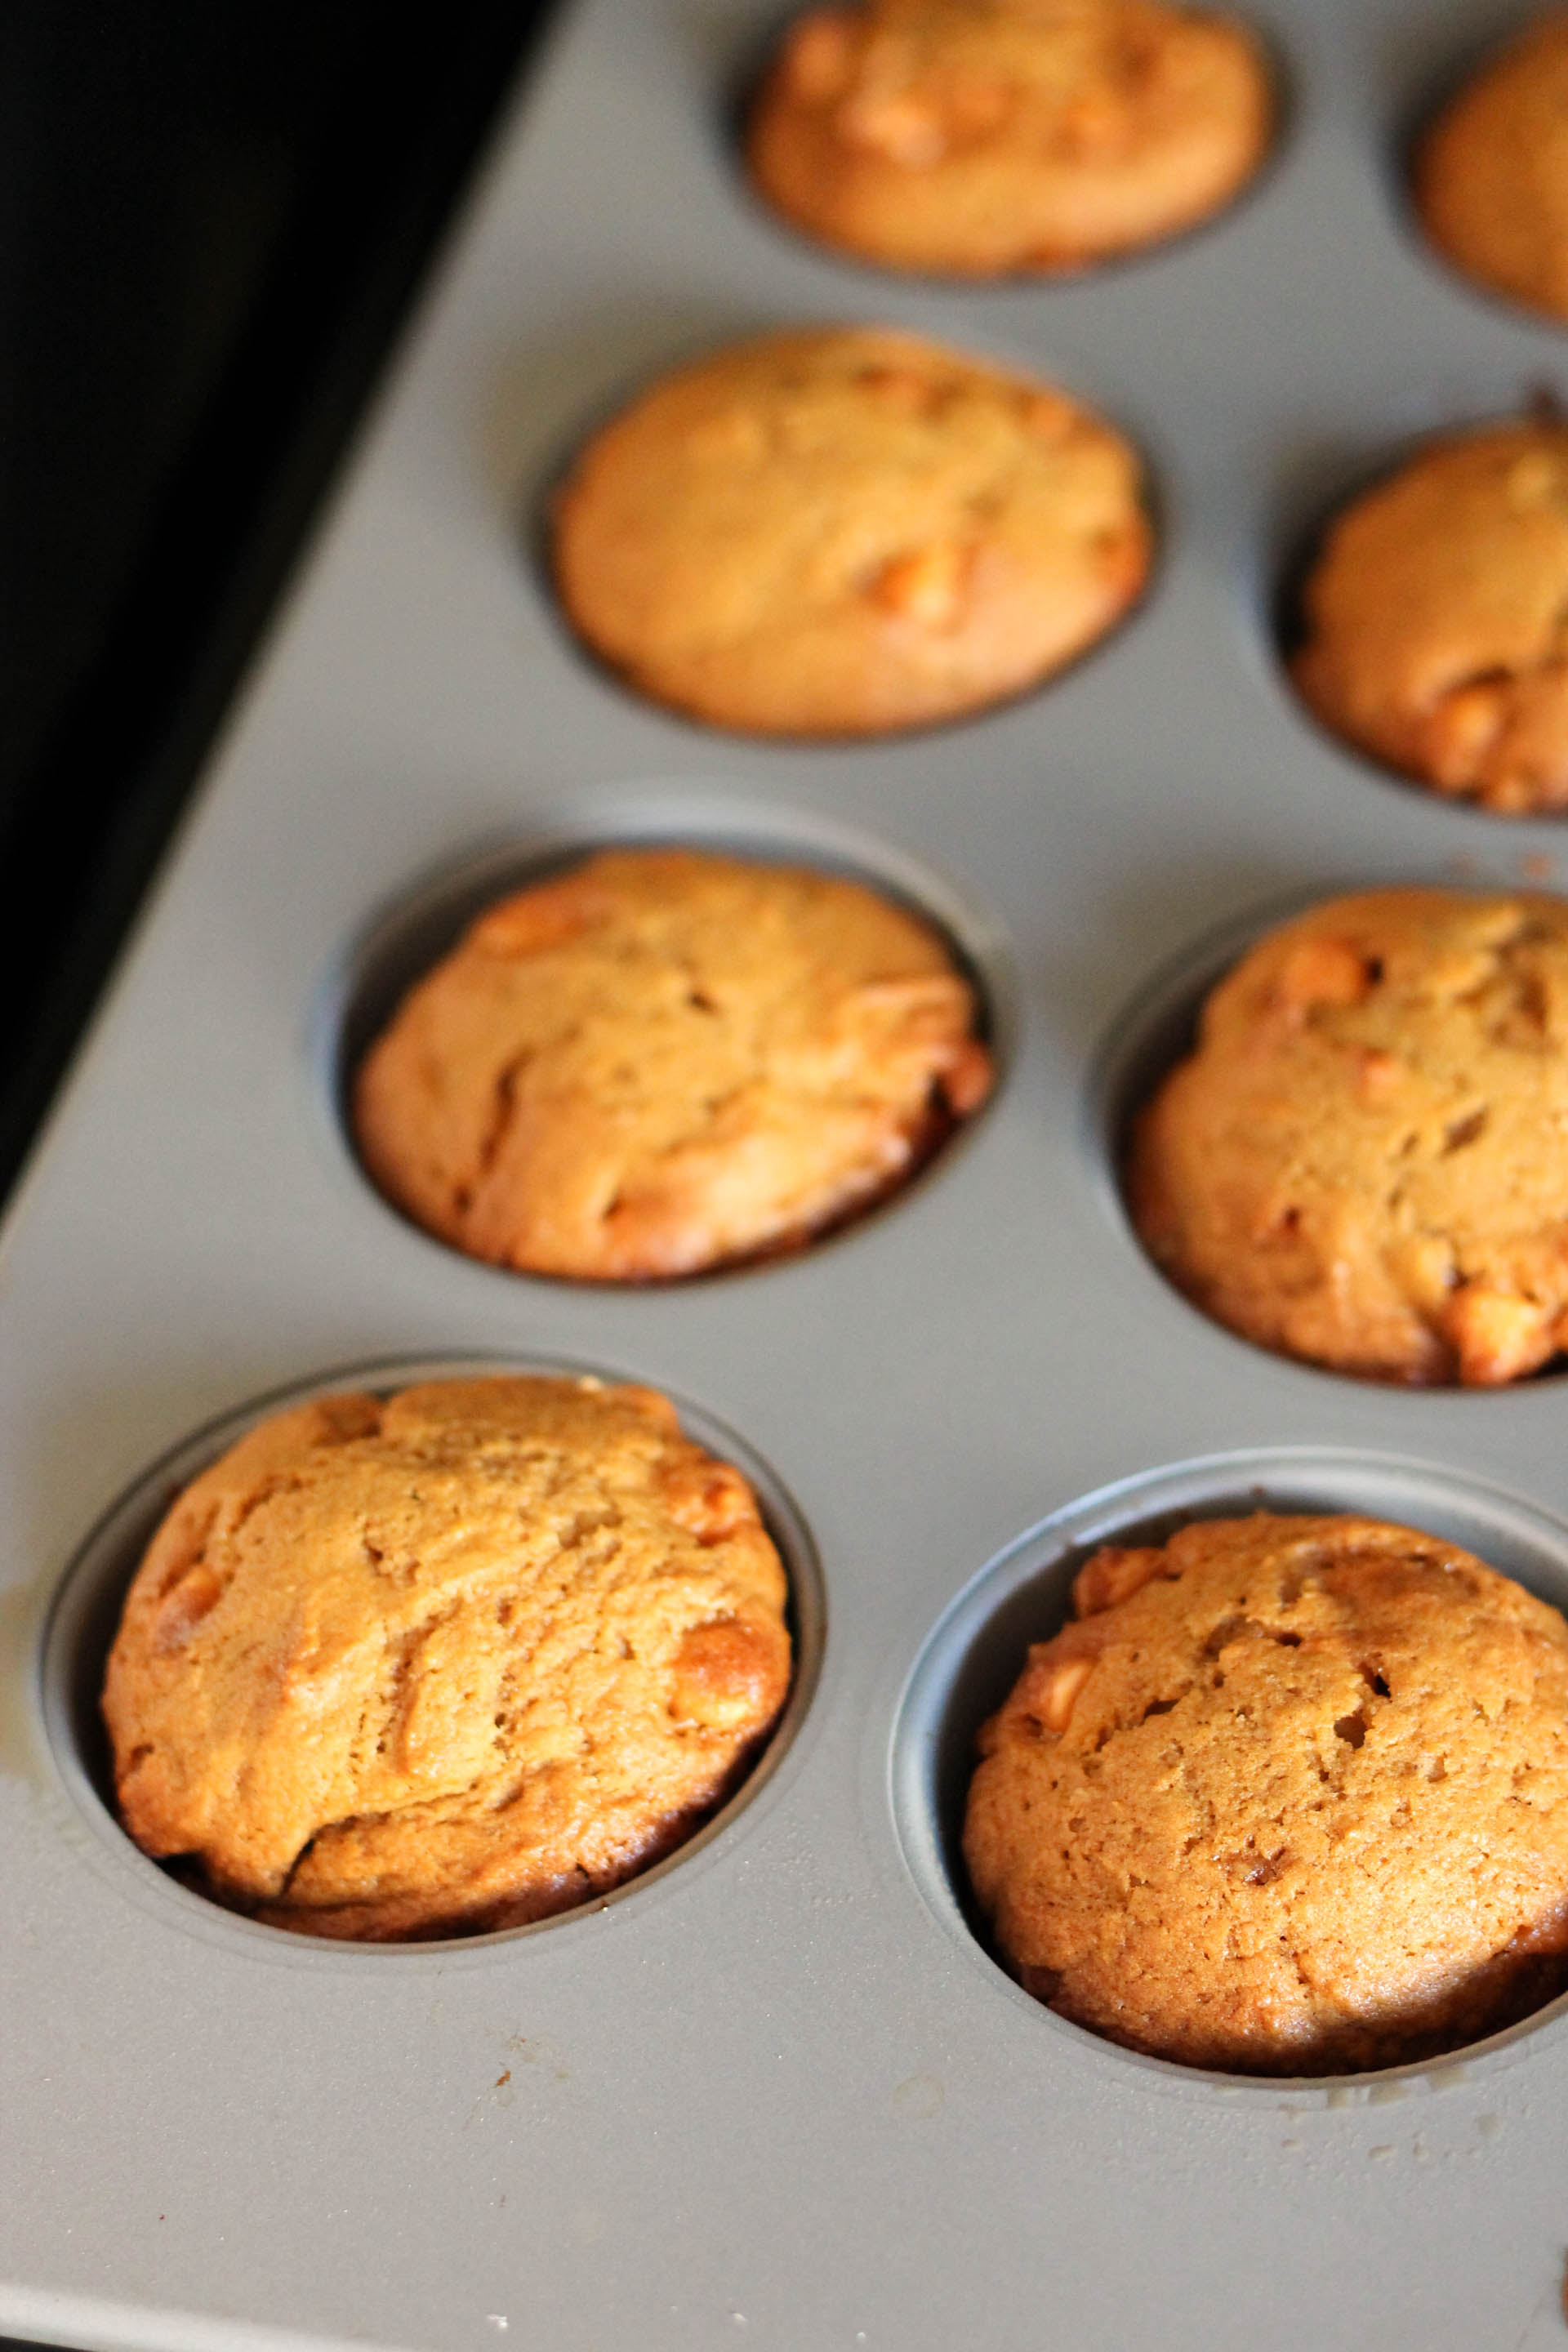 Perfectly baked muffins.